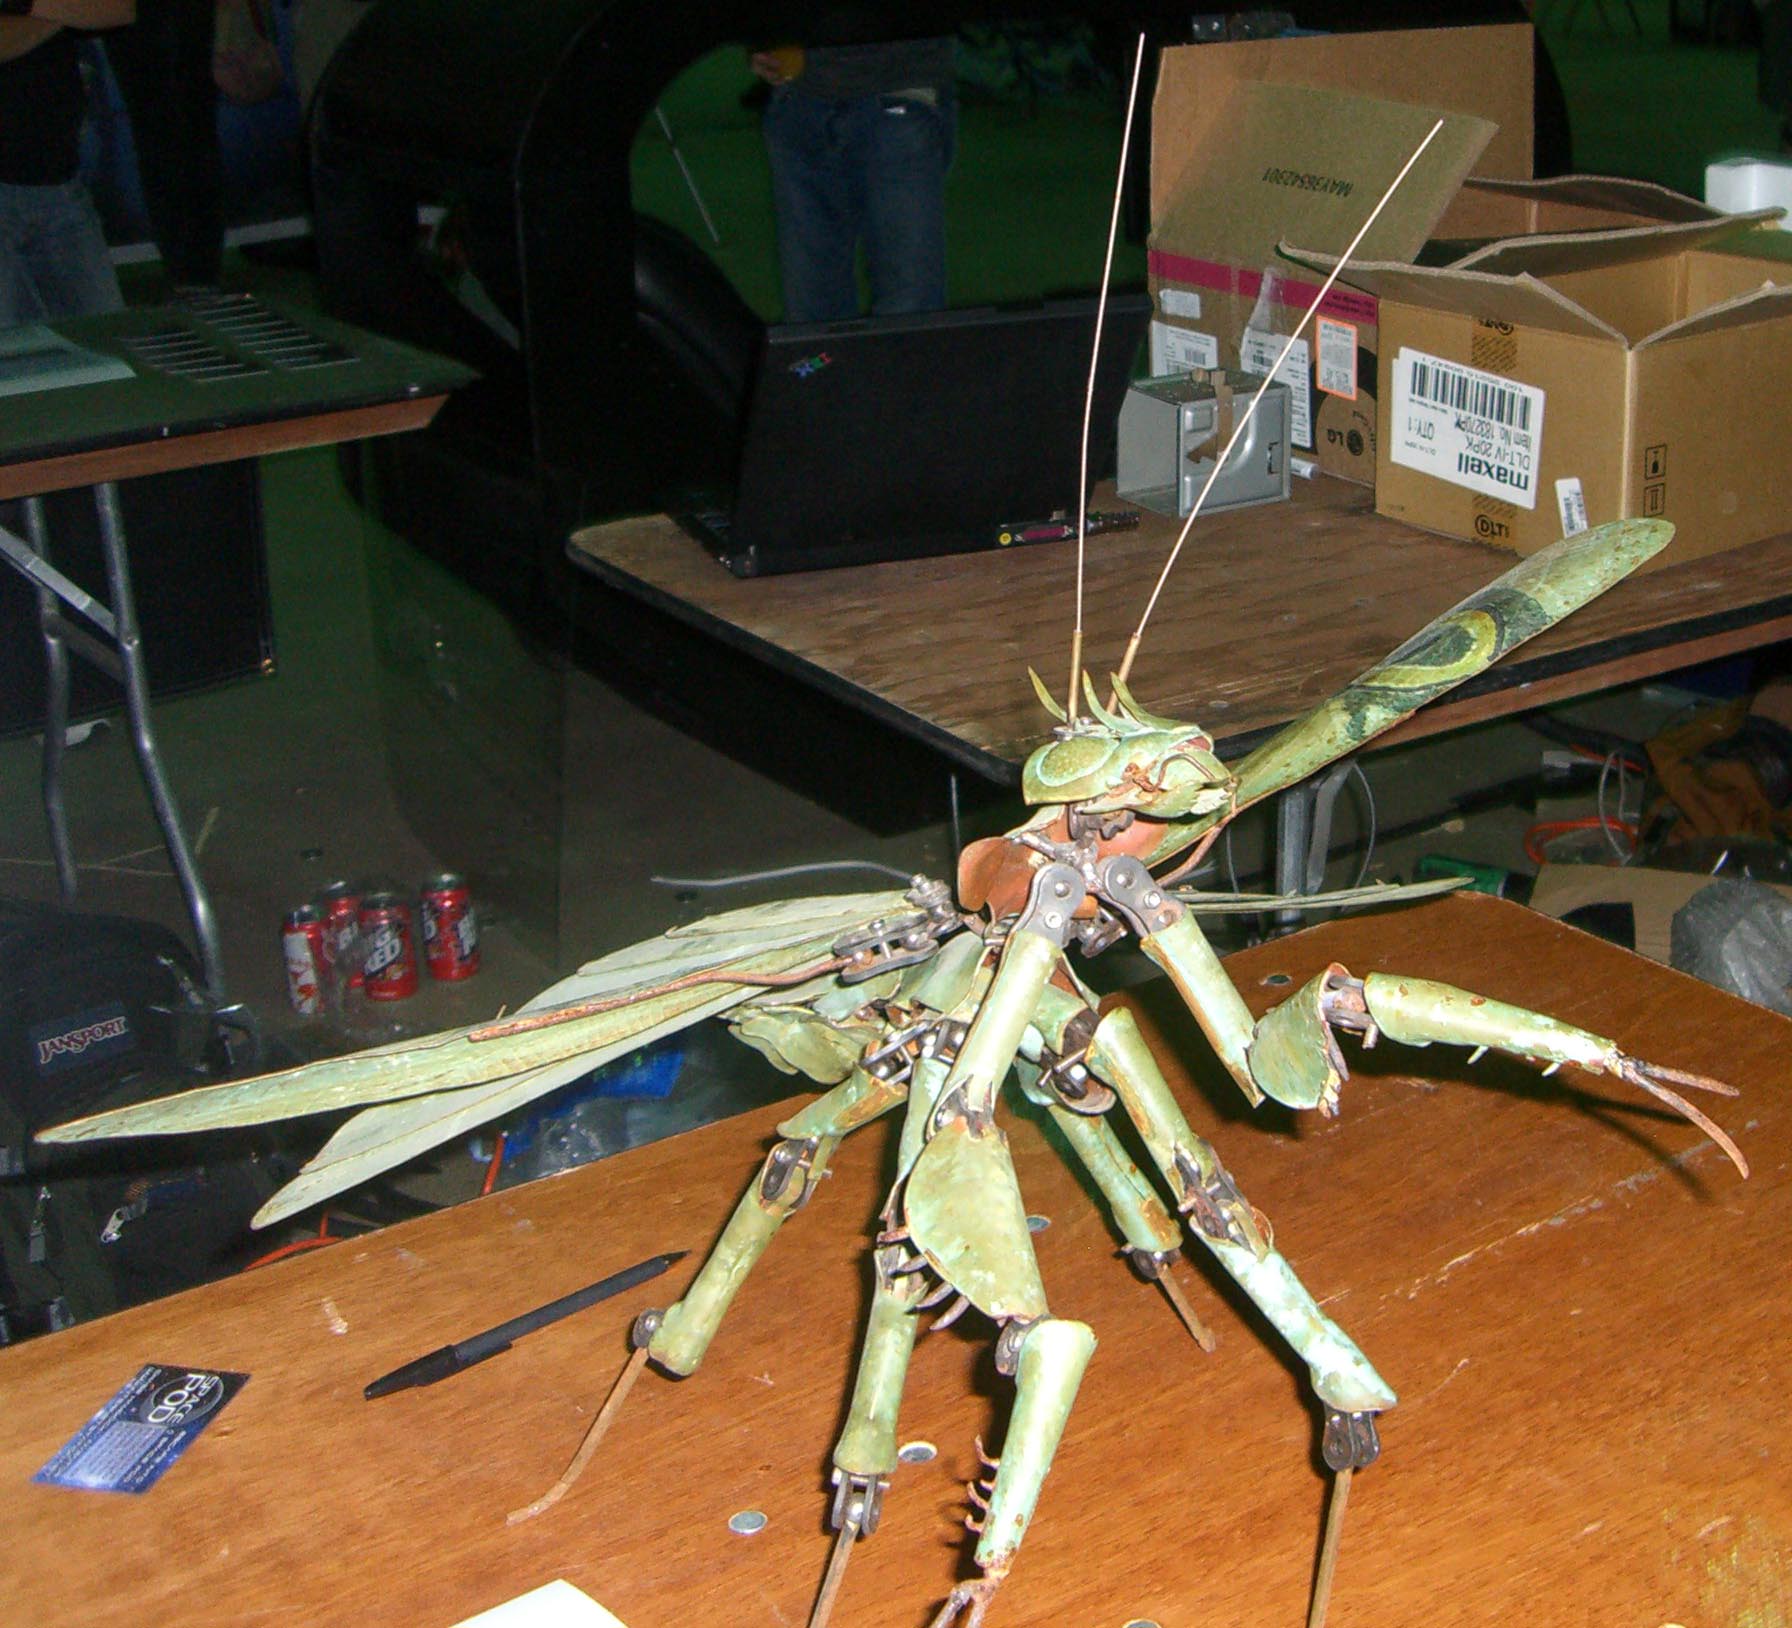 A poseable insect from Stop-Motion Armatures at Maker Faire 2007